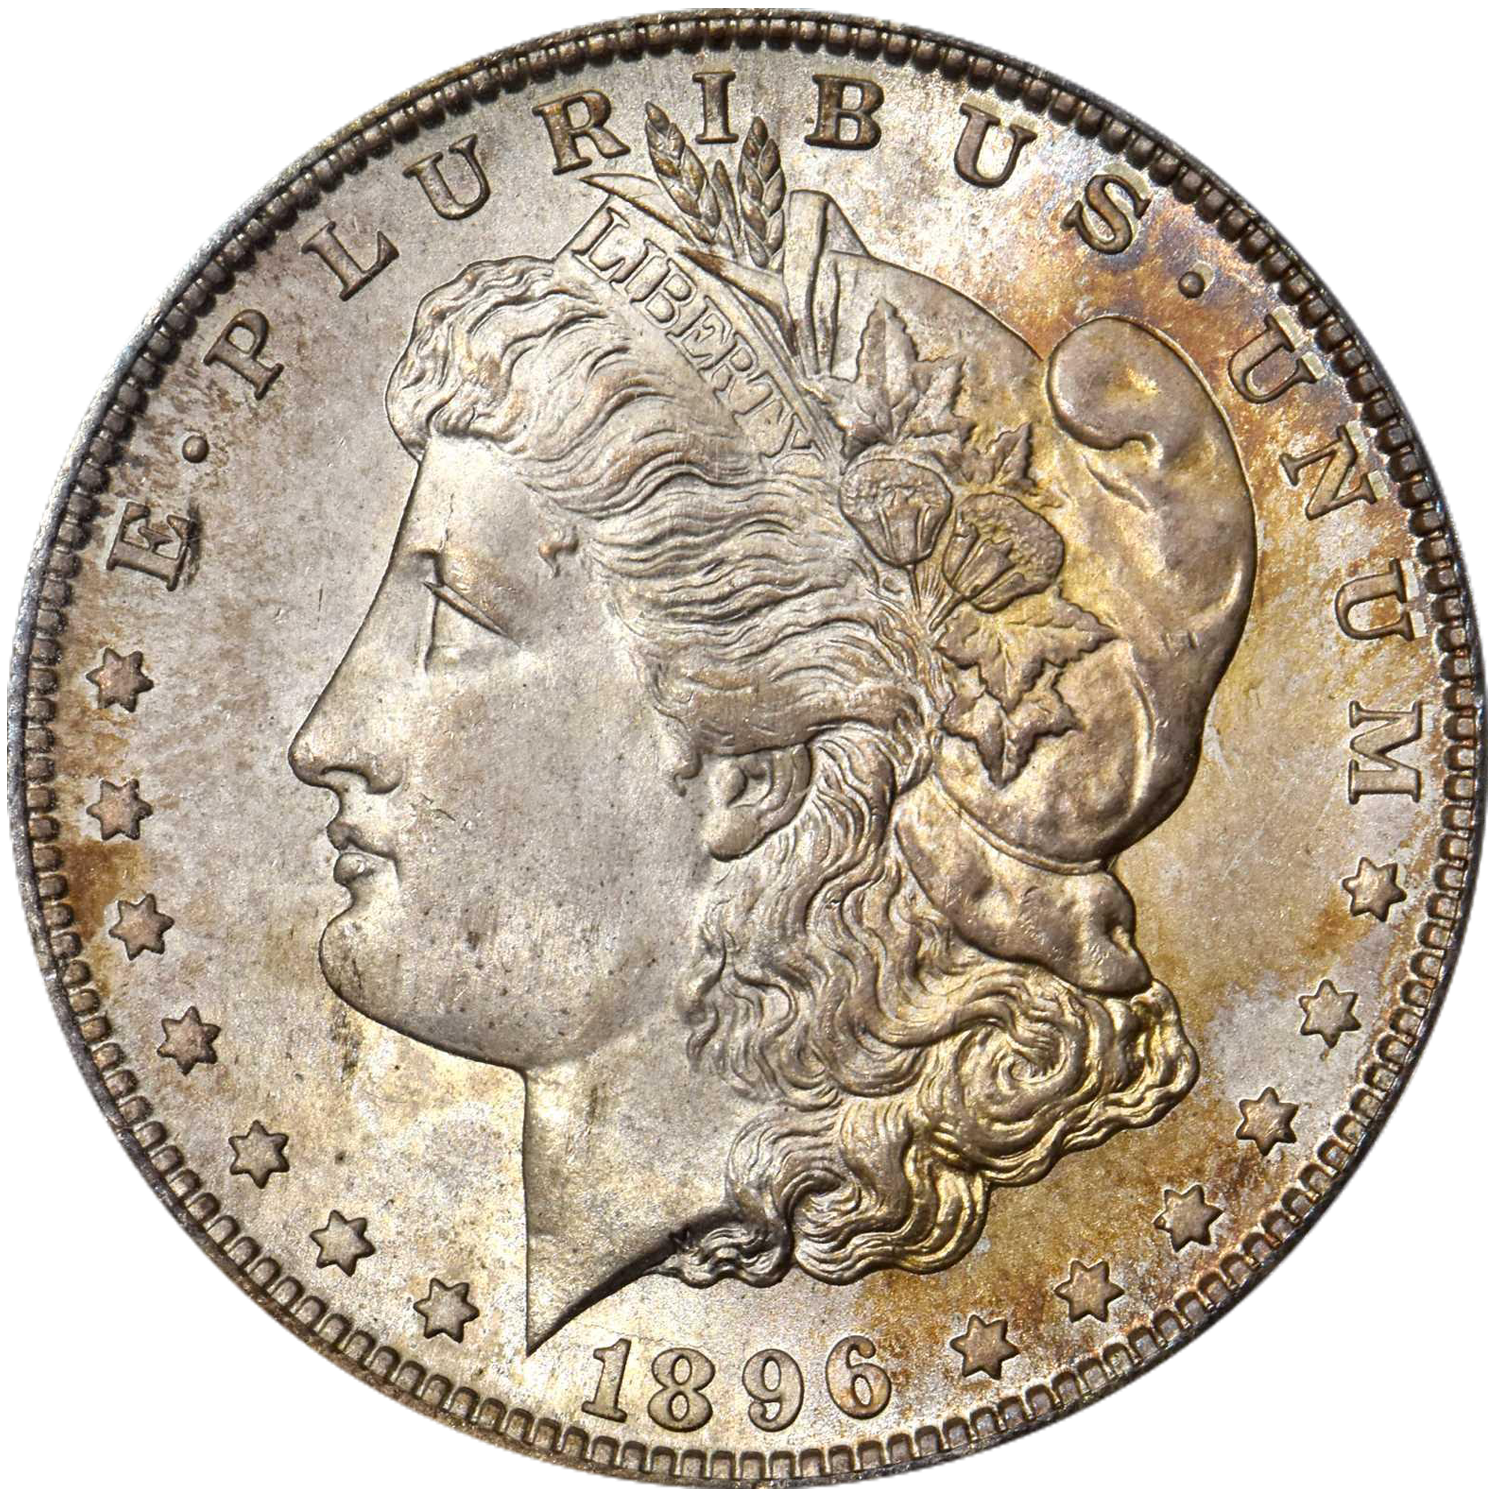 1896 s mint morgan dollar price guide value